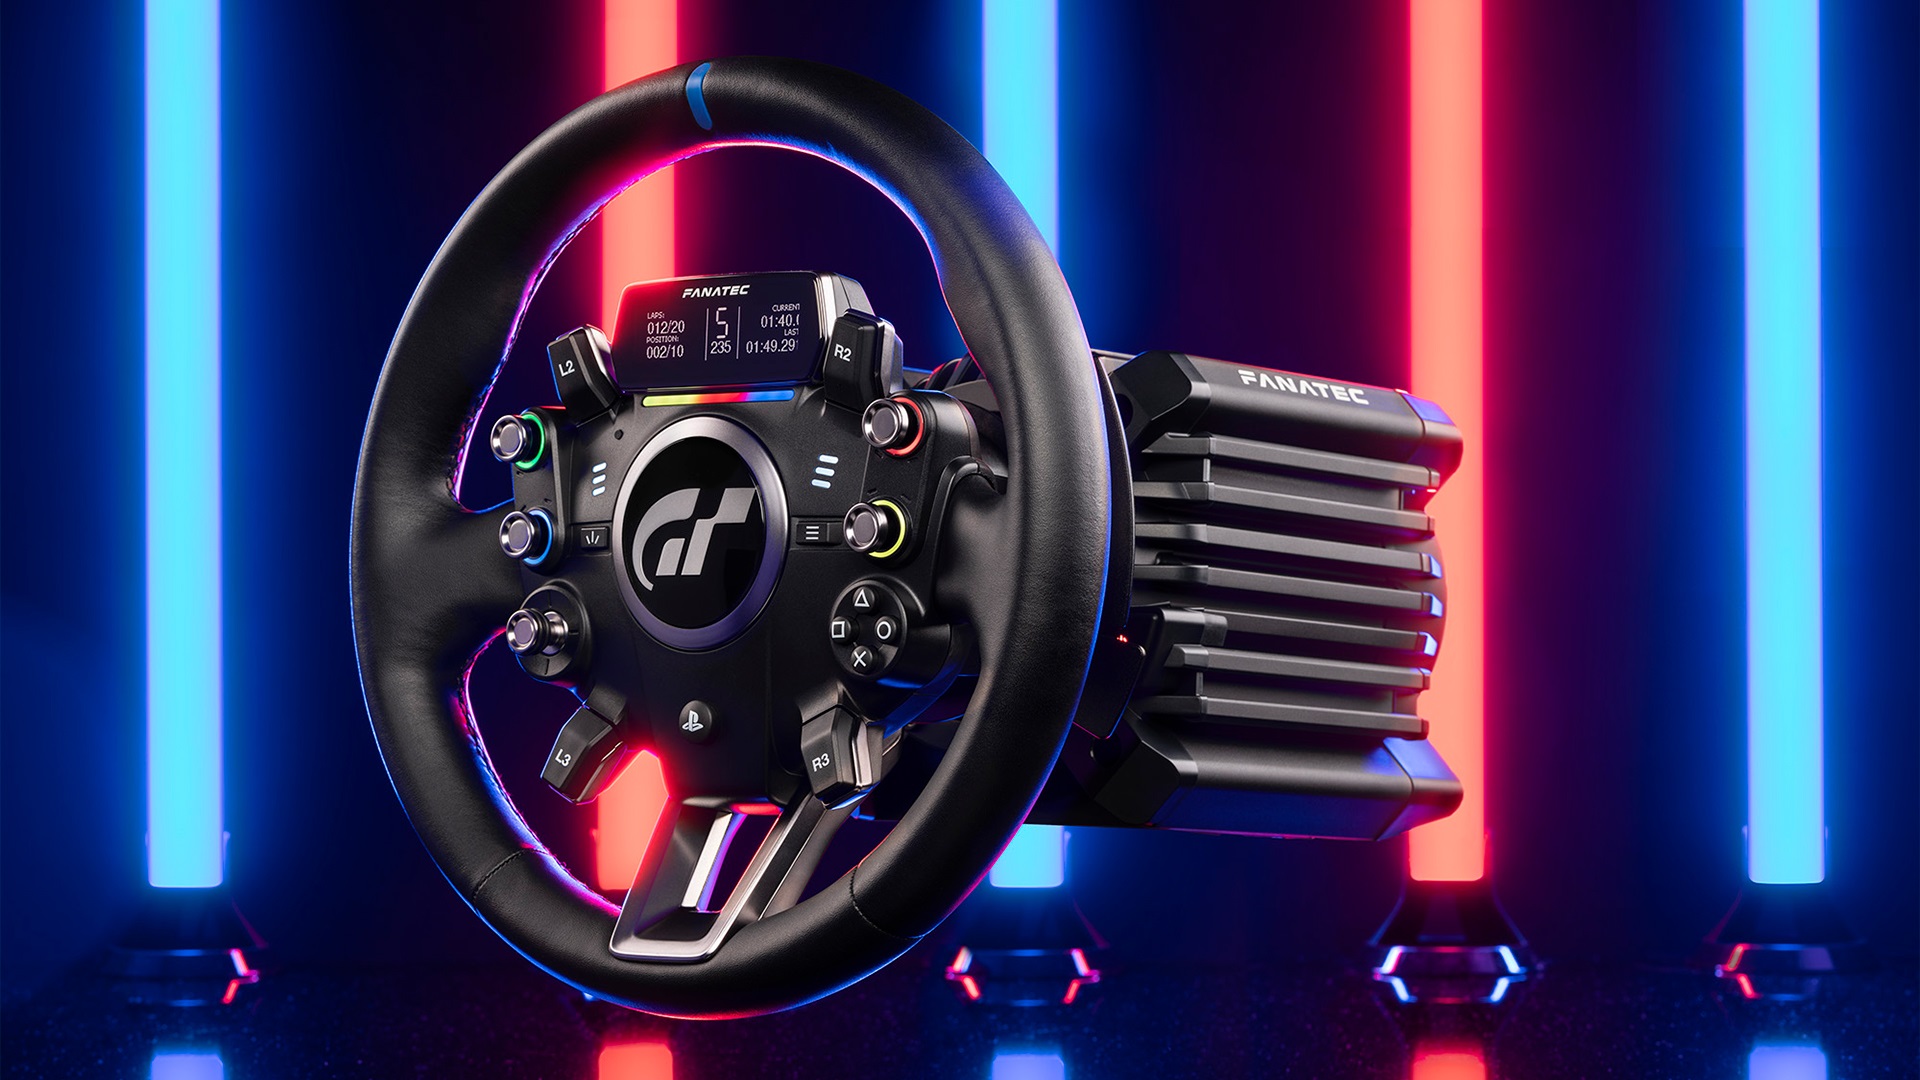 Corsair goes all-in on Sim Racing as it reveals plans to acquire Fanatec